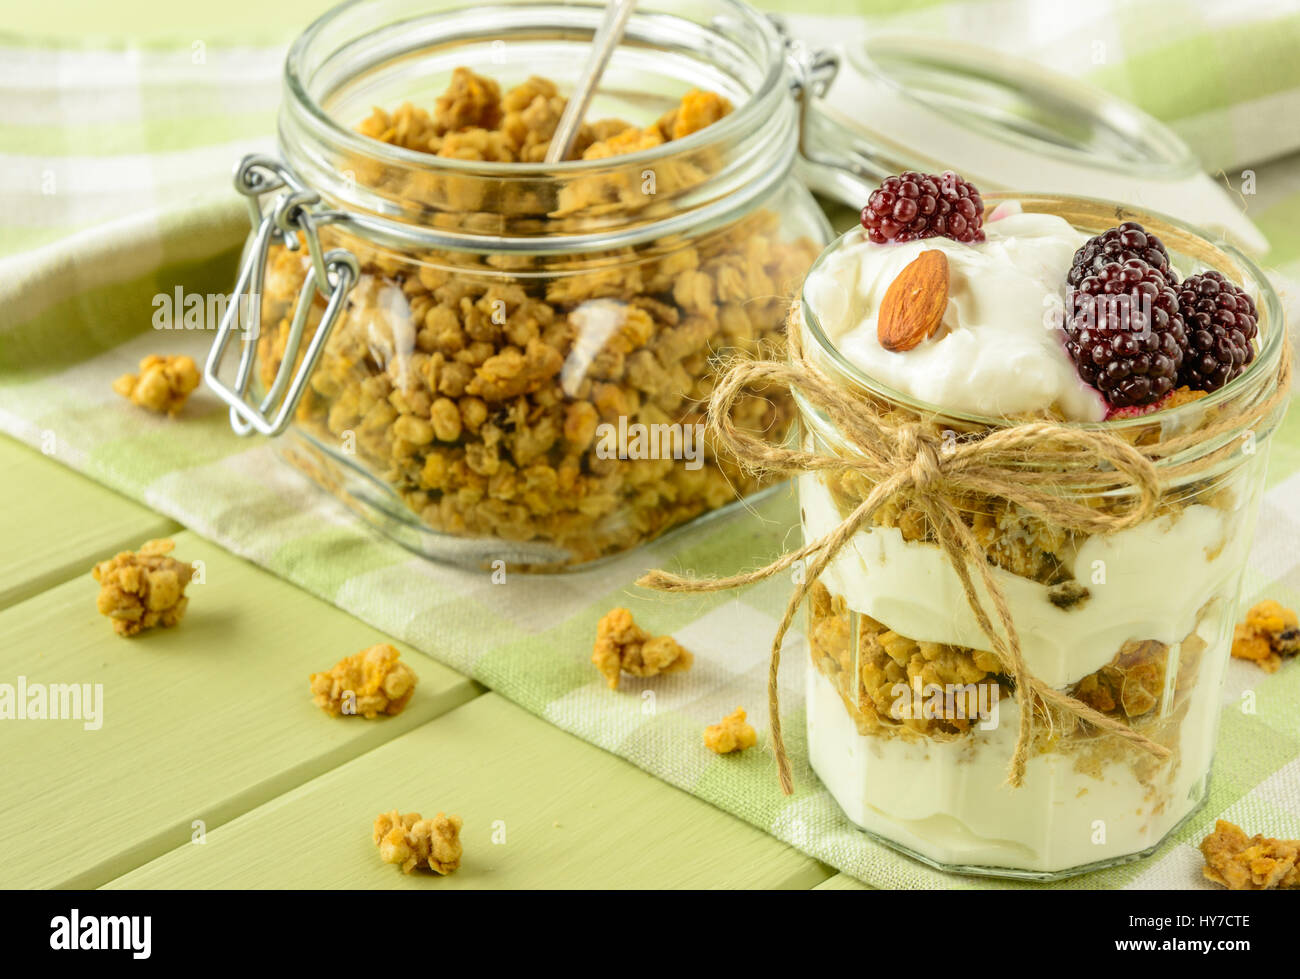 Healthy breakfast ingredients. Homemade granola with yoghurt in open glass jar. The food is rich in useful carbohydrates, vitamins and nutrients that  Stock Photo